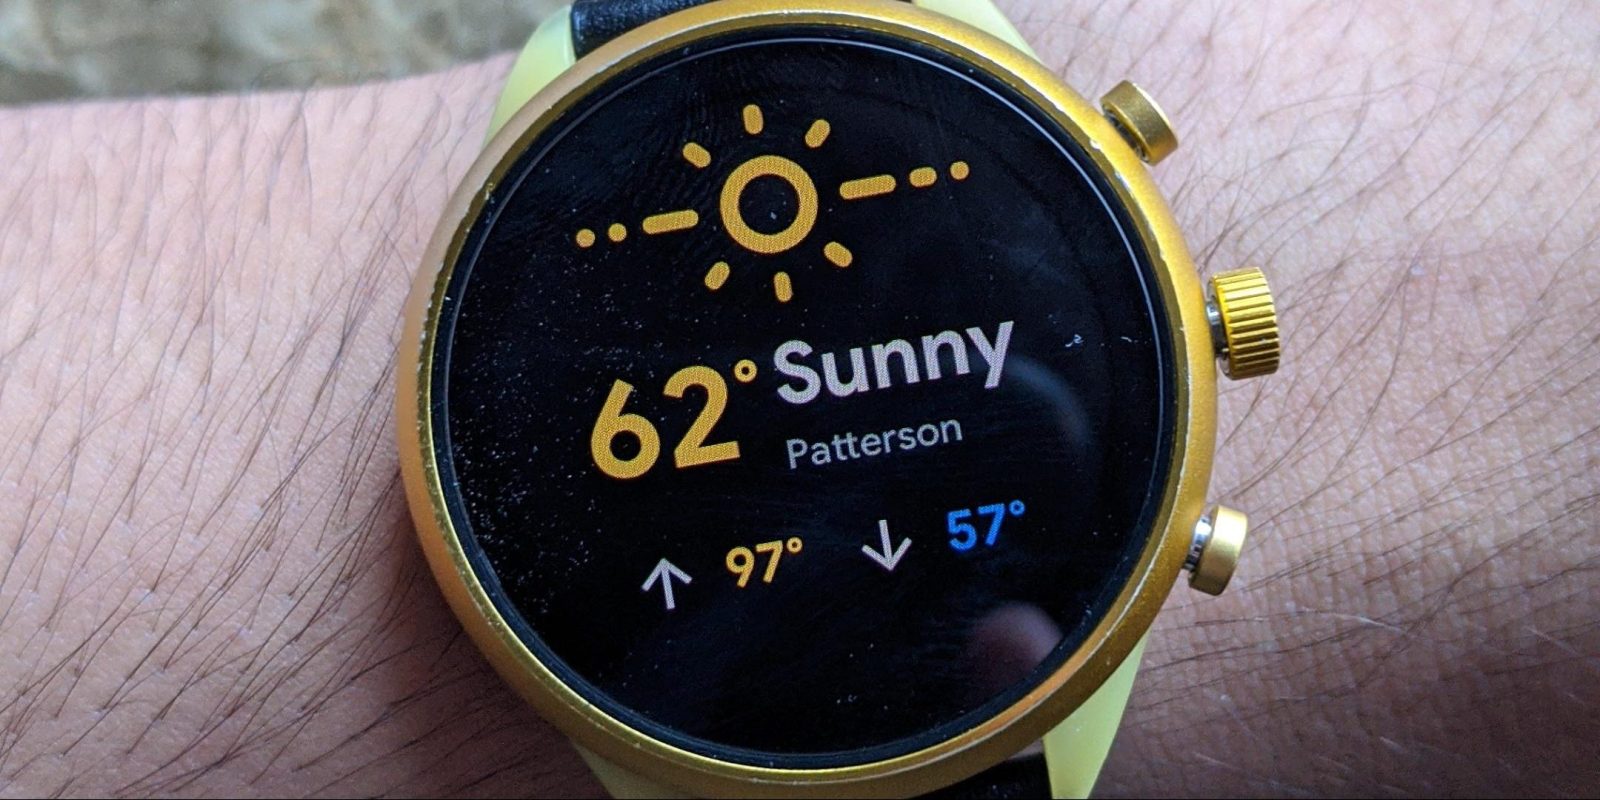 Wear OS Tile showing the weather